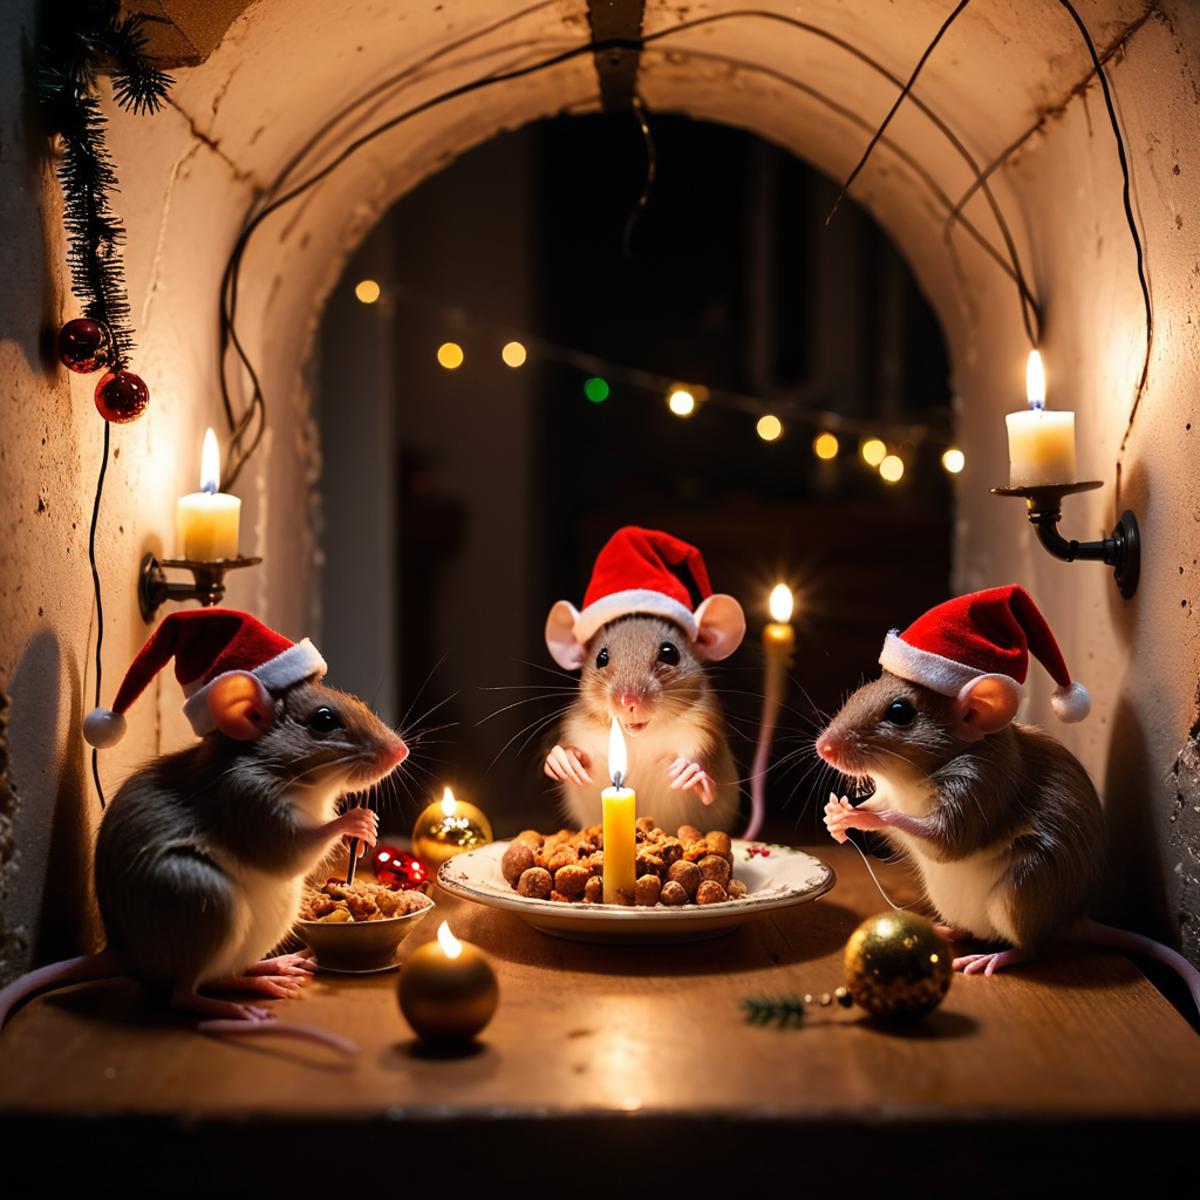 Three mice wearing Santa hats and eating nuts from a plate.